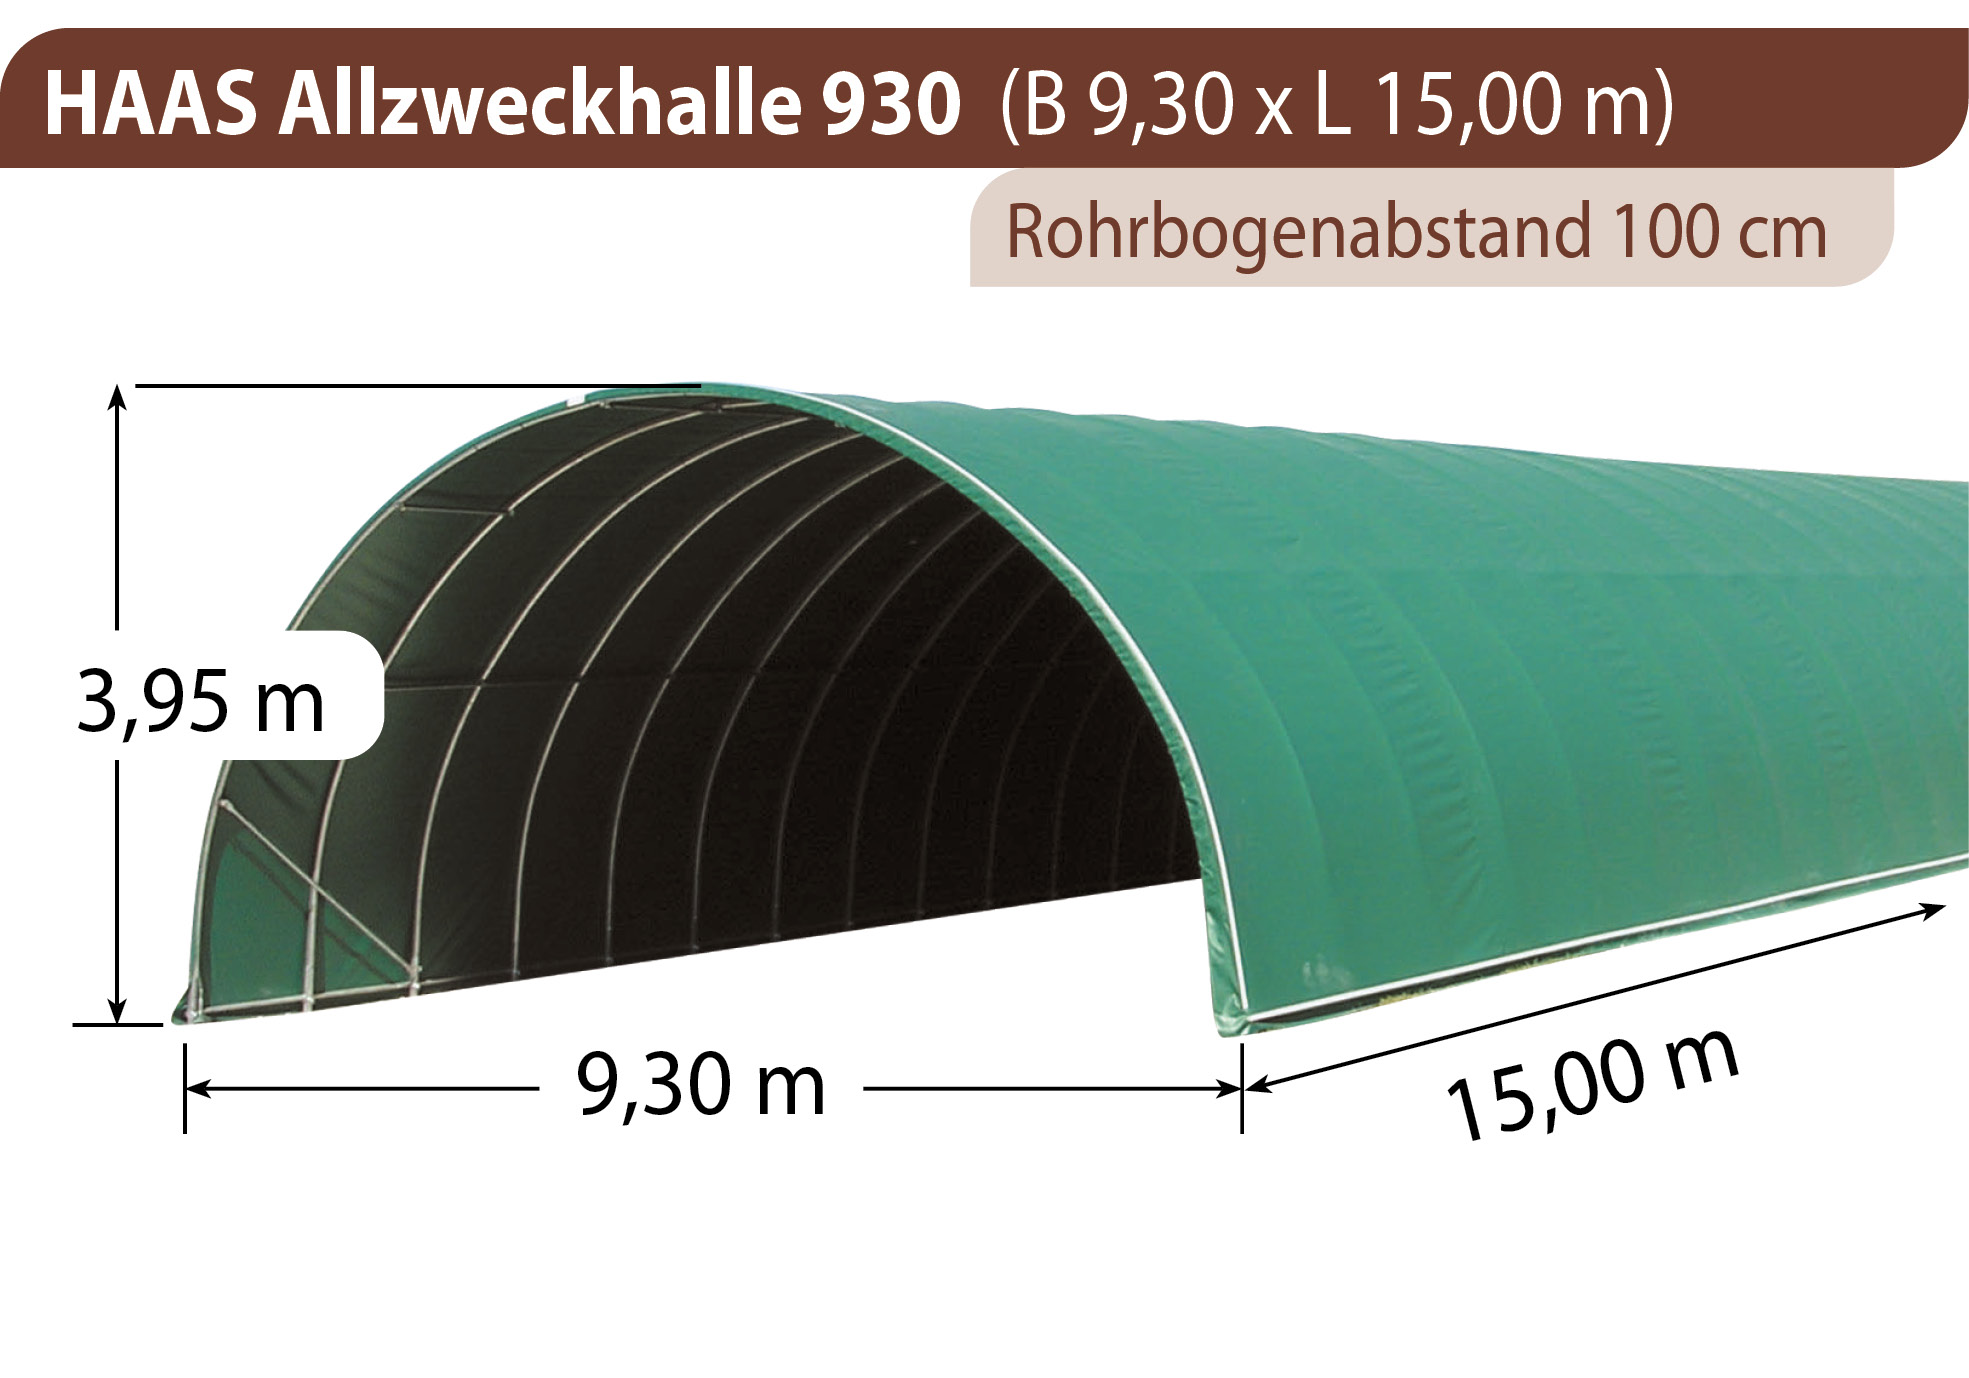 HAAS Allzweckhalle 930 - 15 m lang